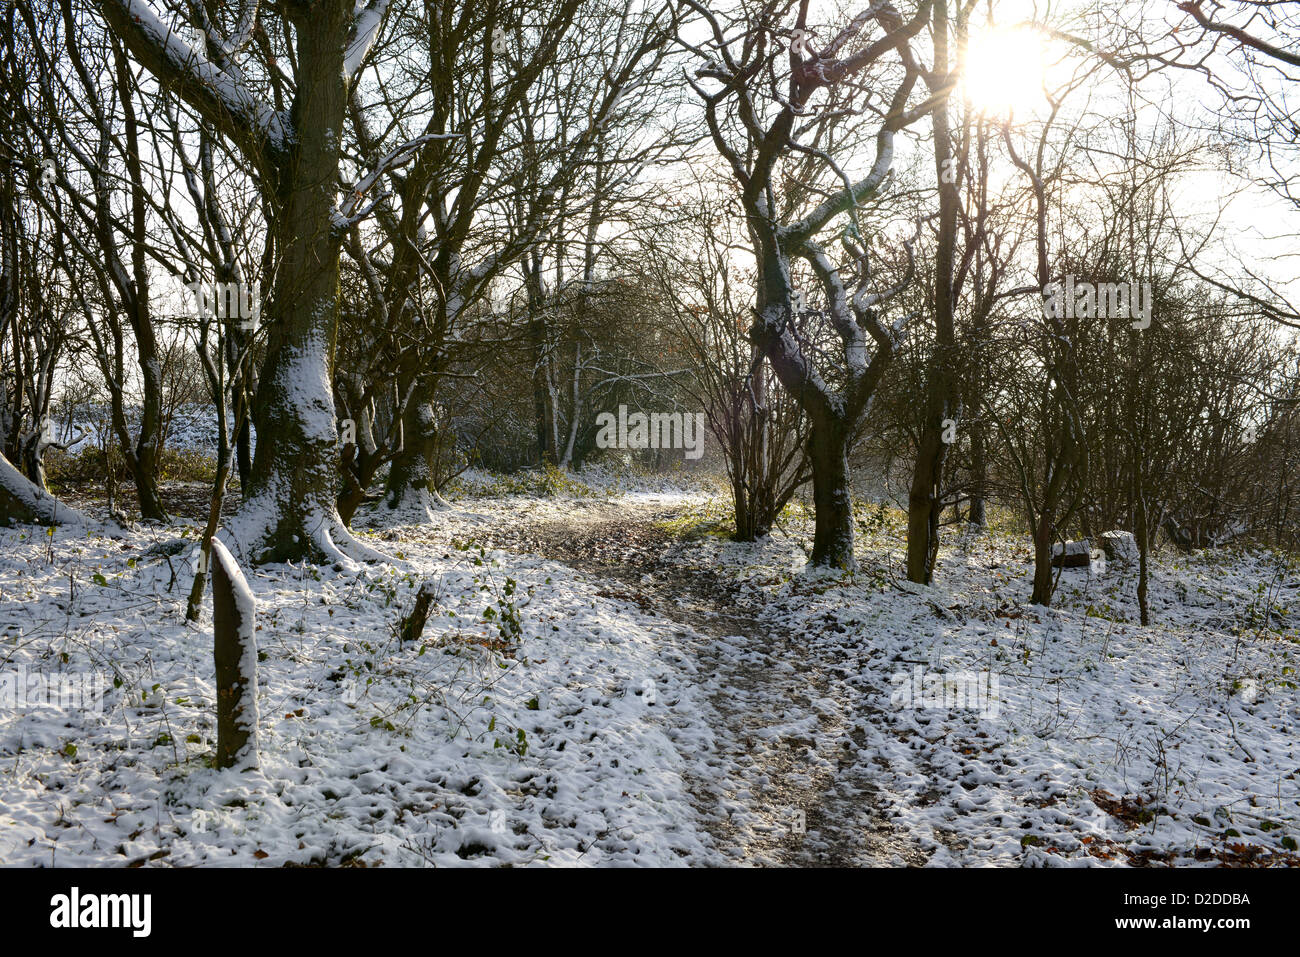 Kent countryside with trees covered in snow. Winter image with sun coming through trees on to path. Stock Photo